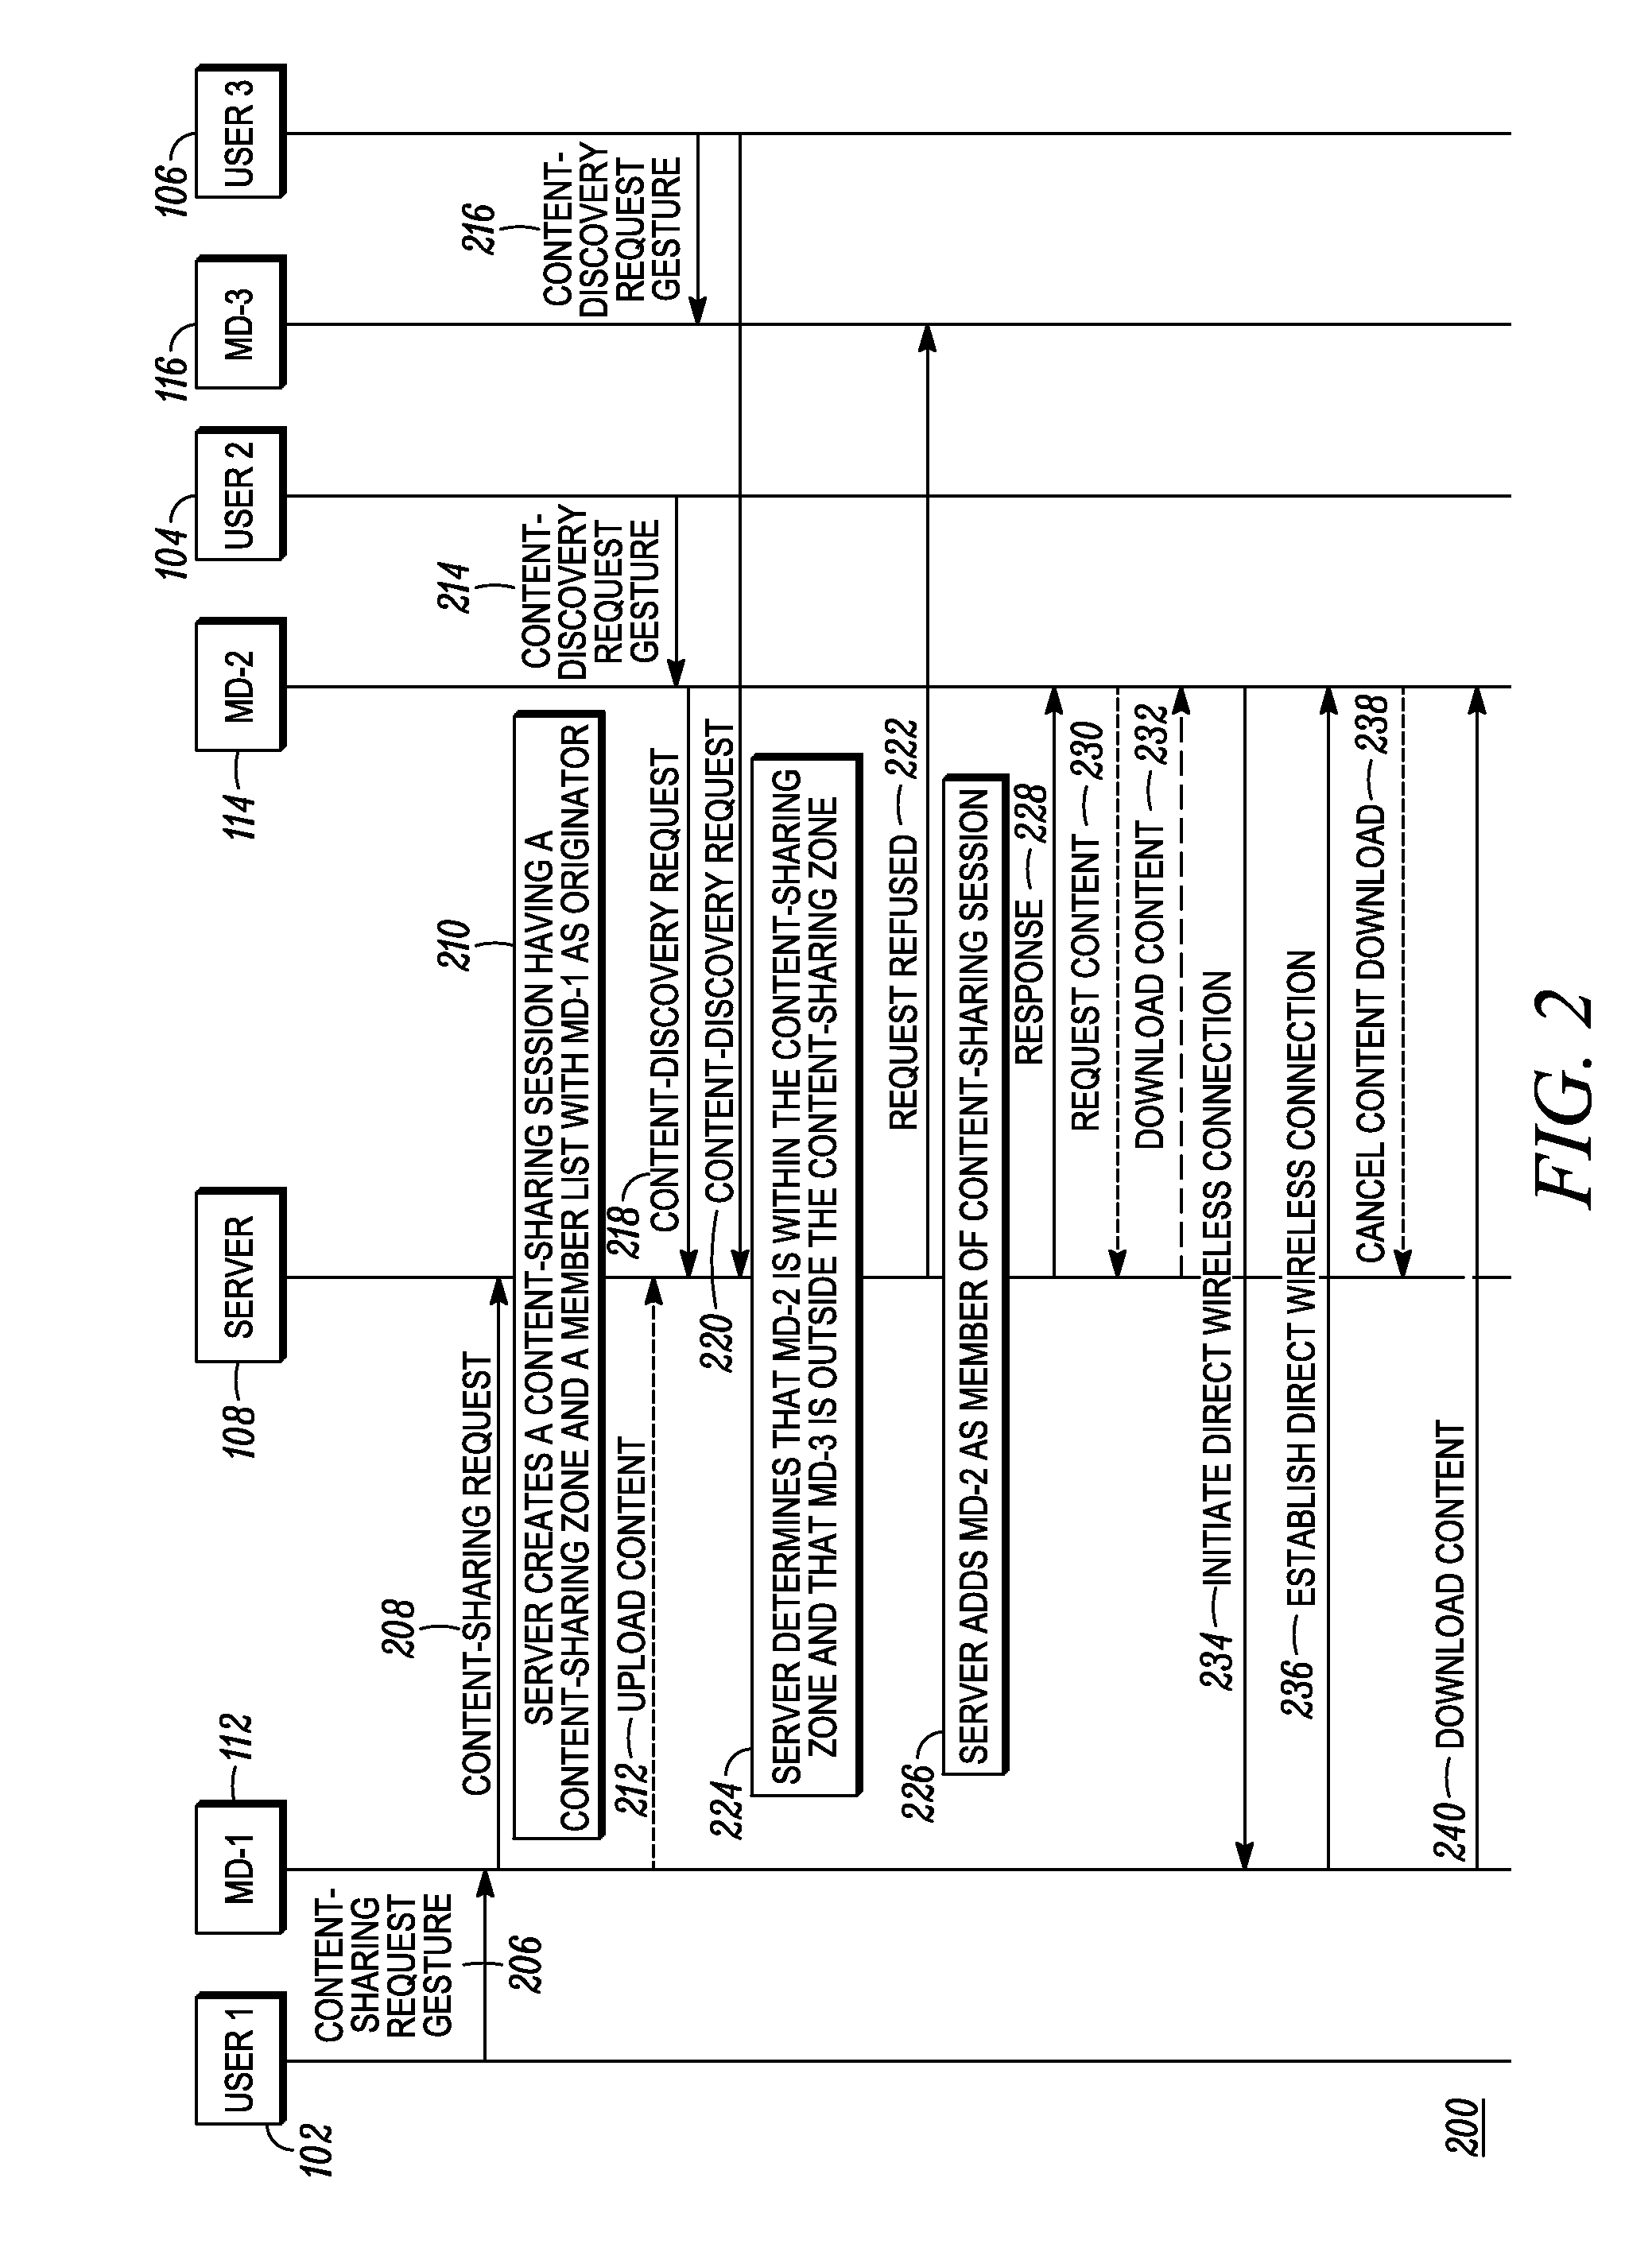 Methods and apparatus for content sharing between multiple mobile electronic devices